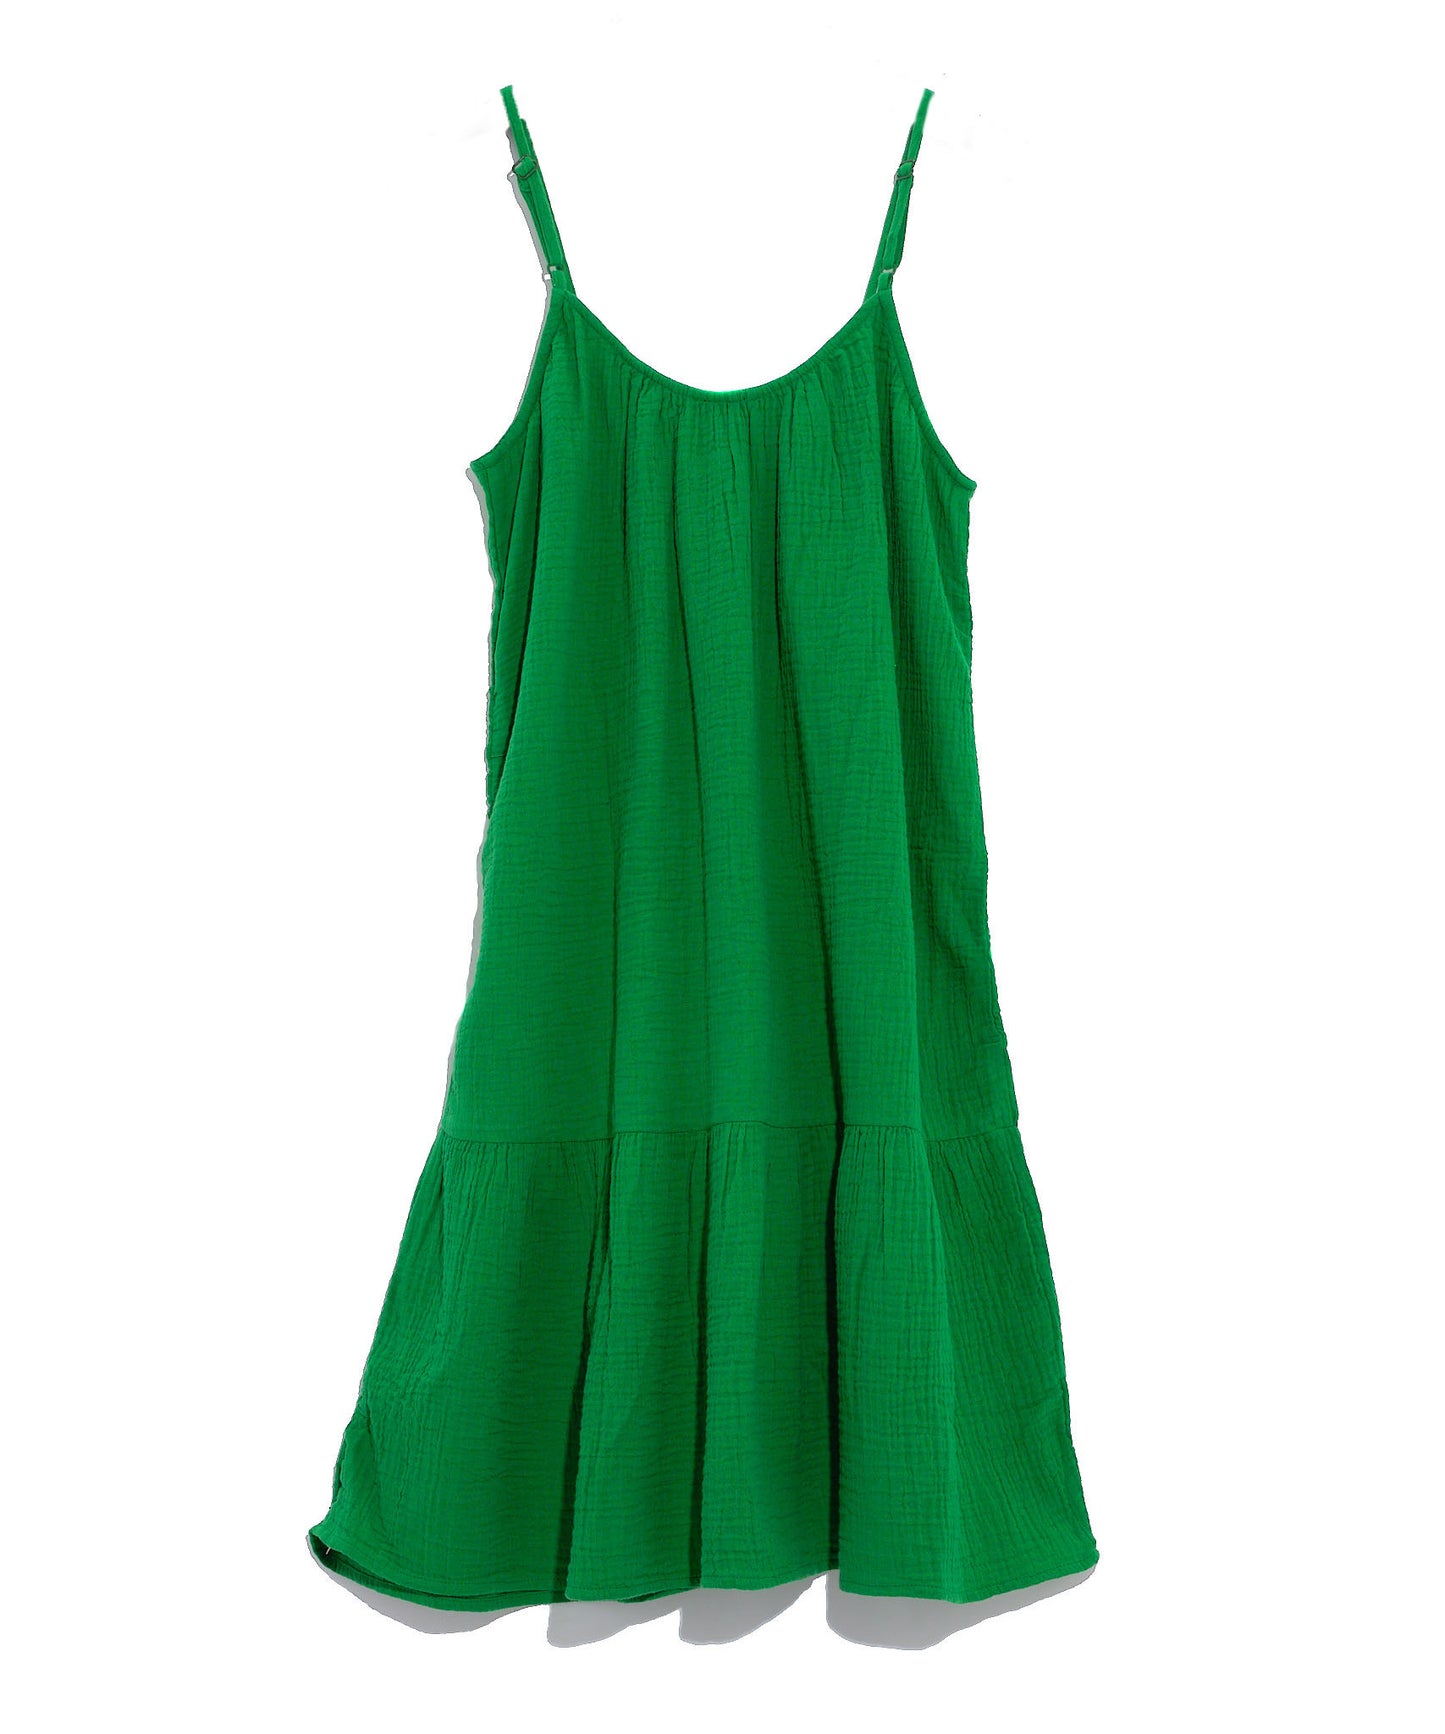 Supersoft Gauze Lilou Dress in color Amazon Green